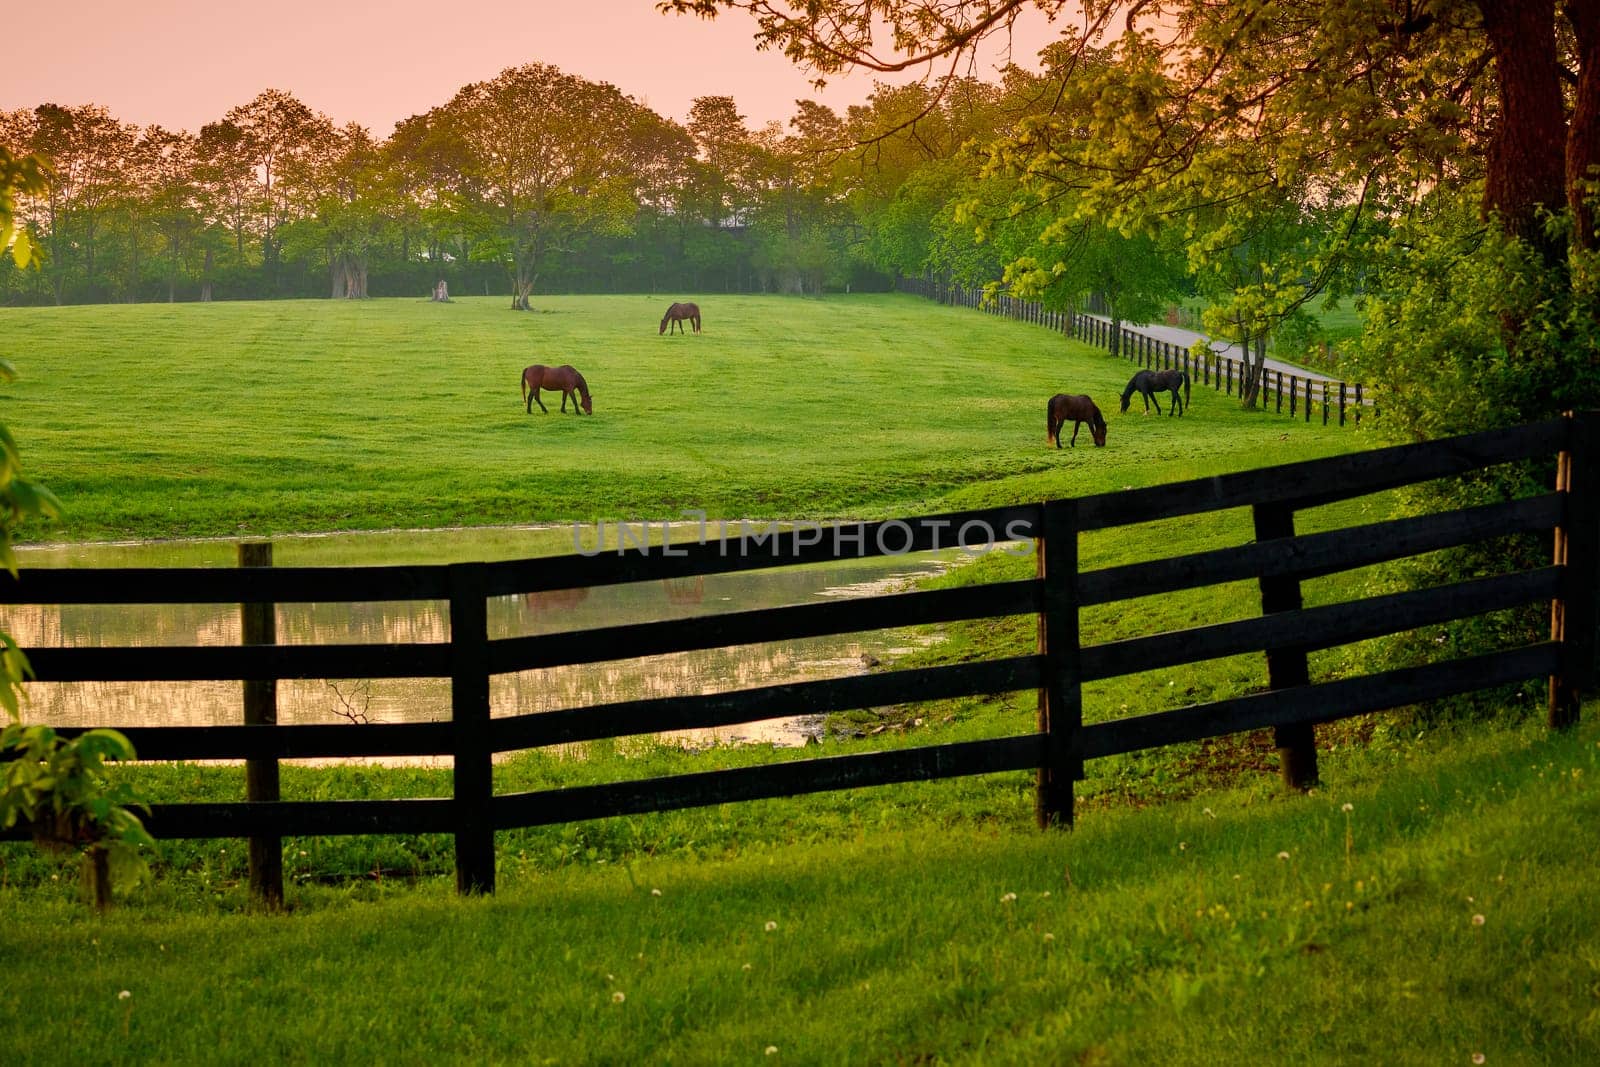 Horses grazing in a field with fence and pond. by patrickstock